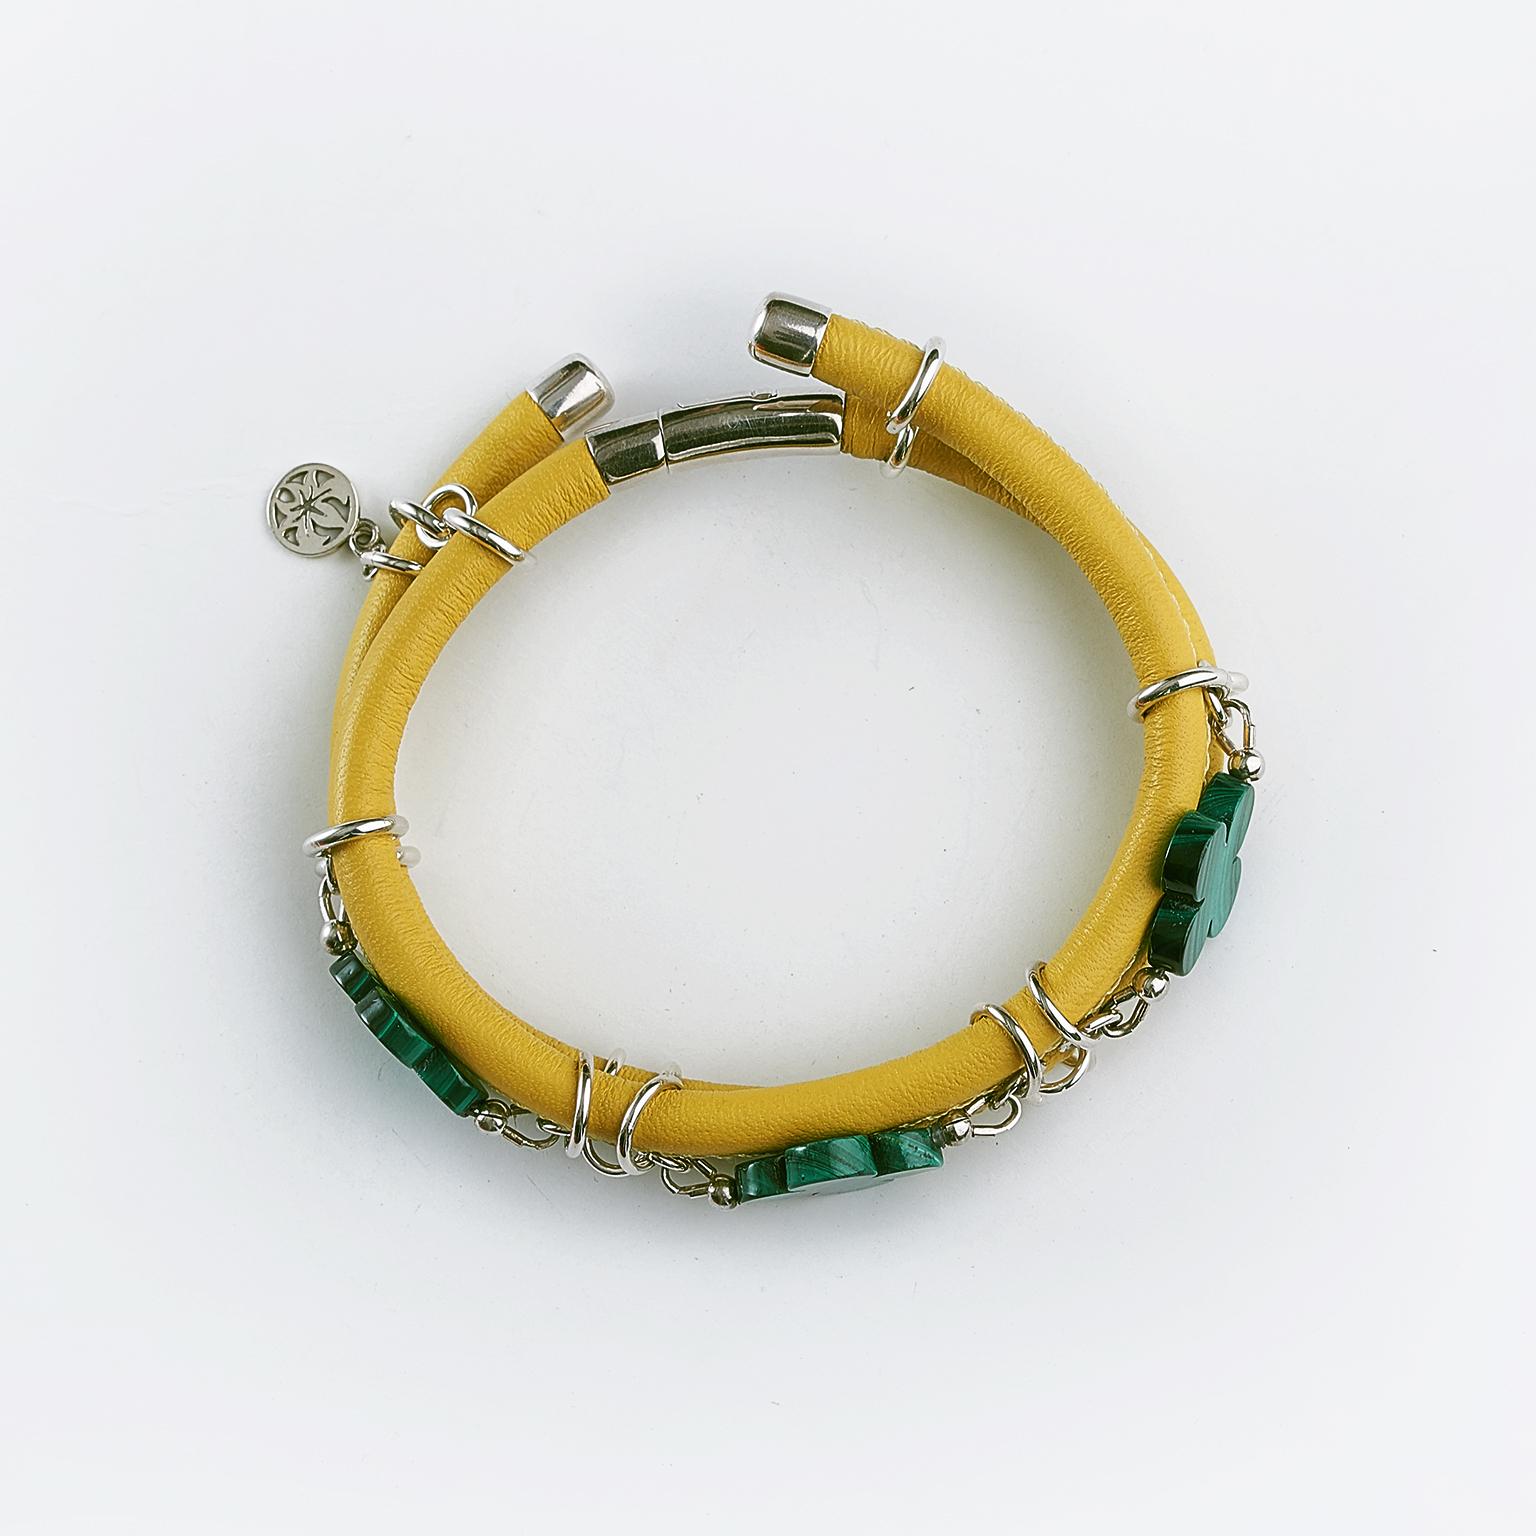 Contemporary Rock Lily ( NEW ) Yellow Leather Bangle Bracelet With Malachite Clovers For Sale